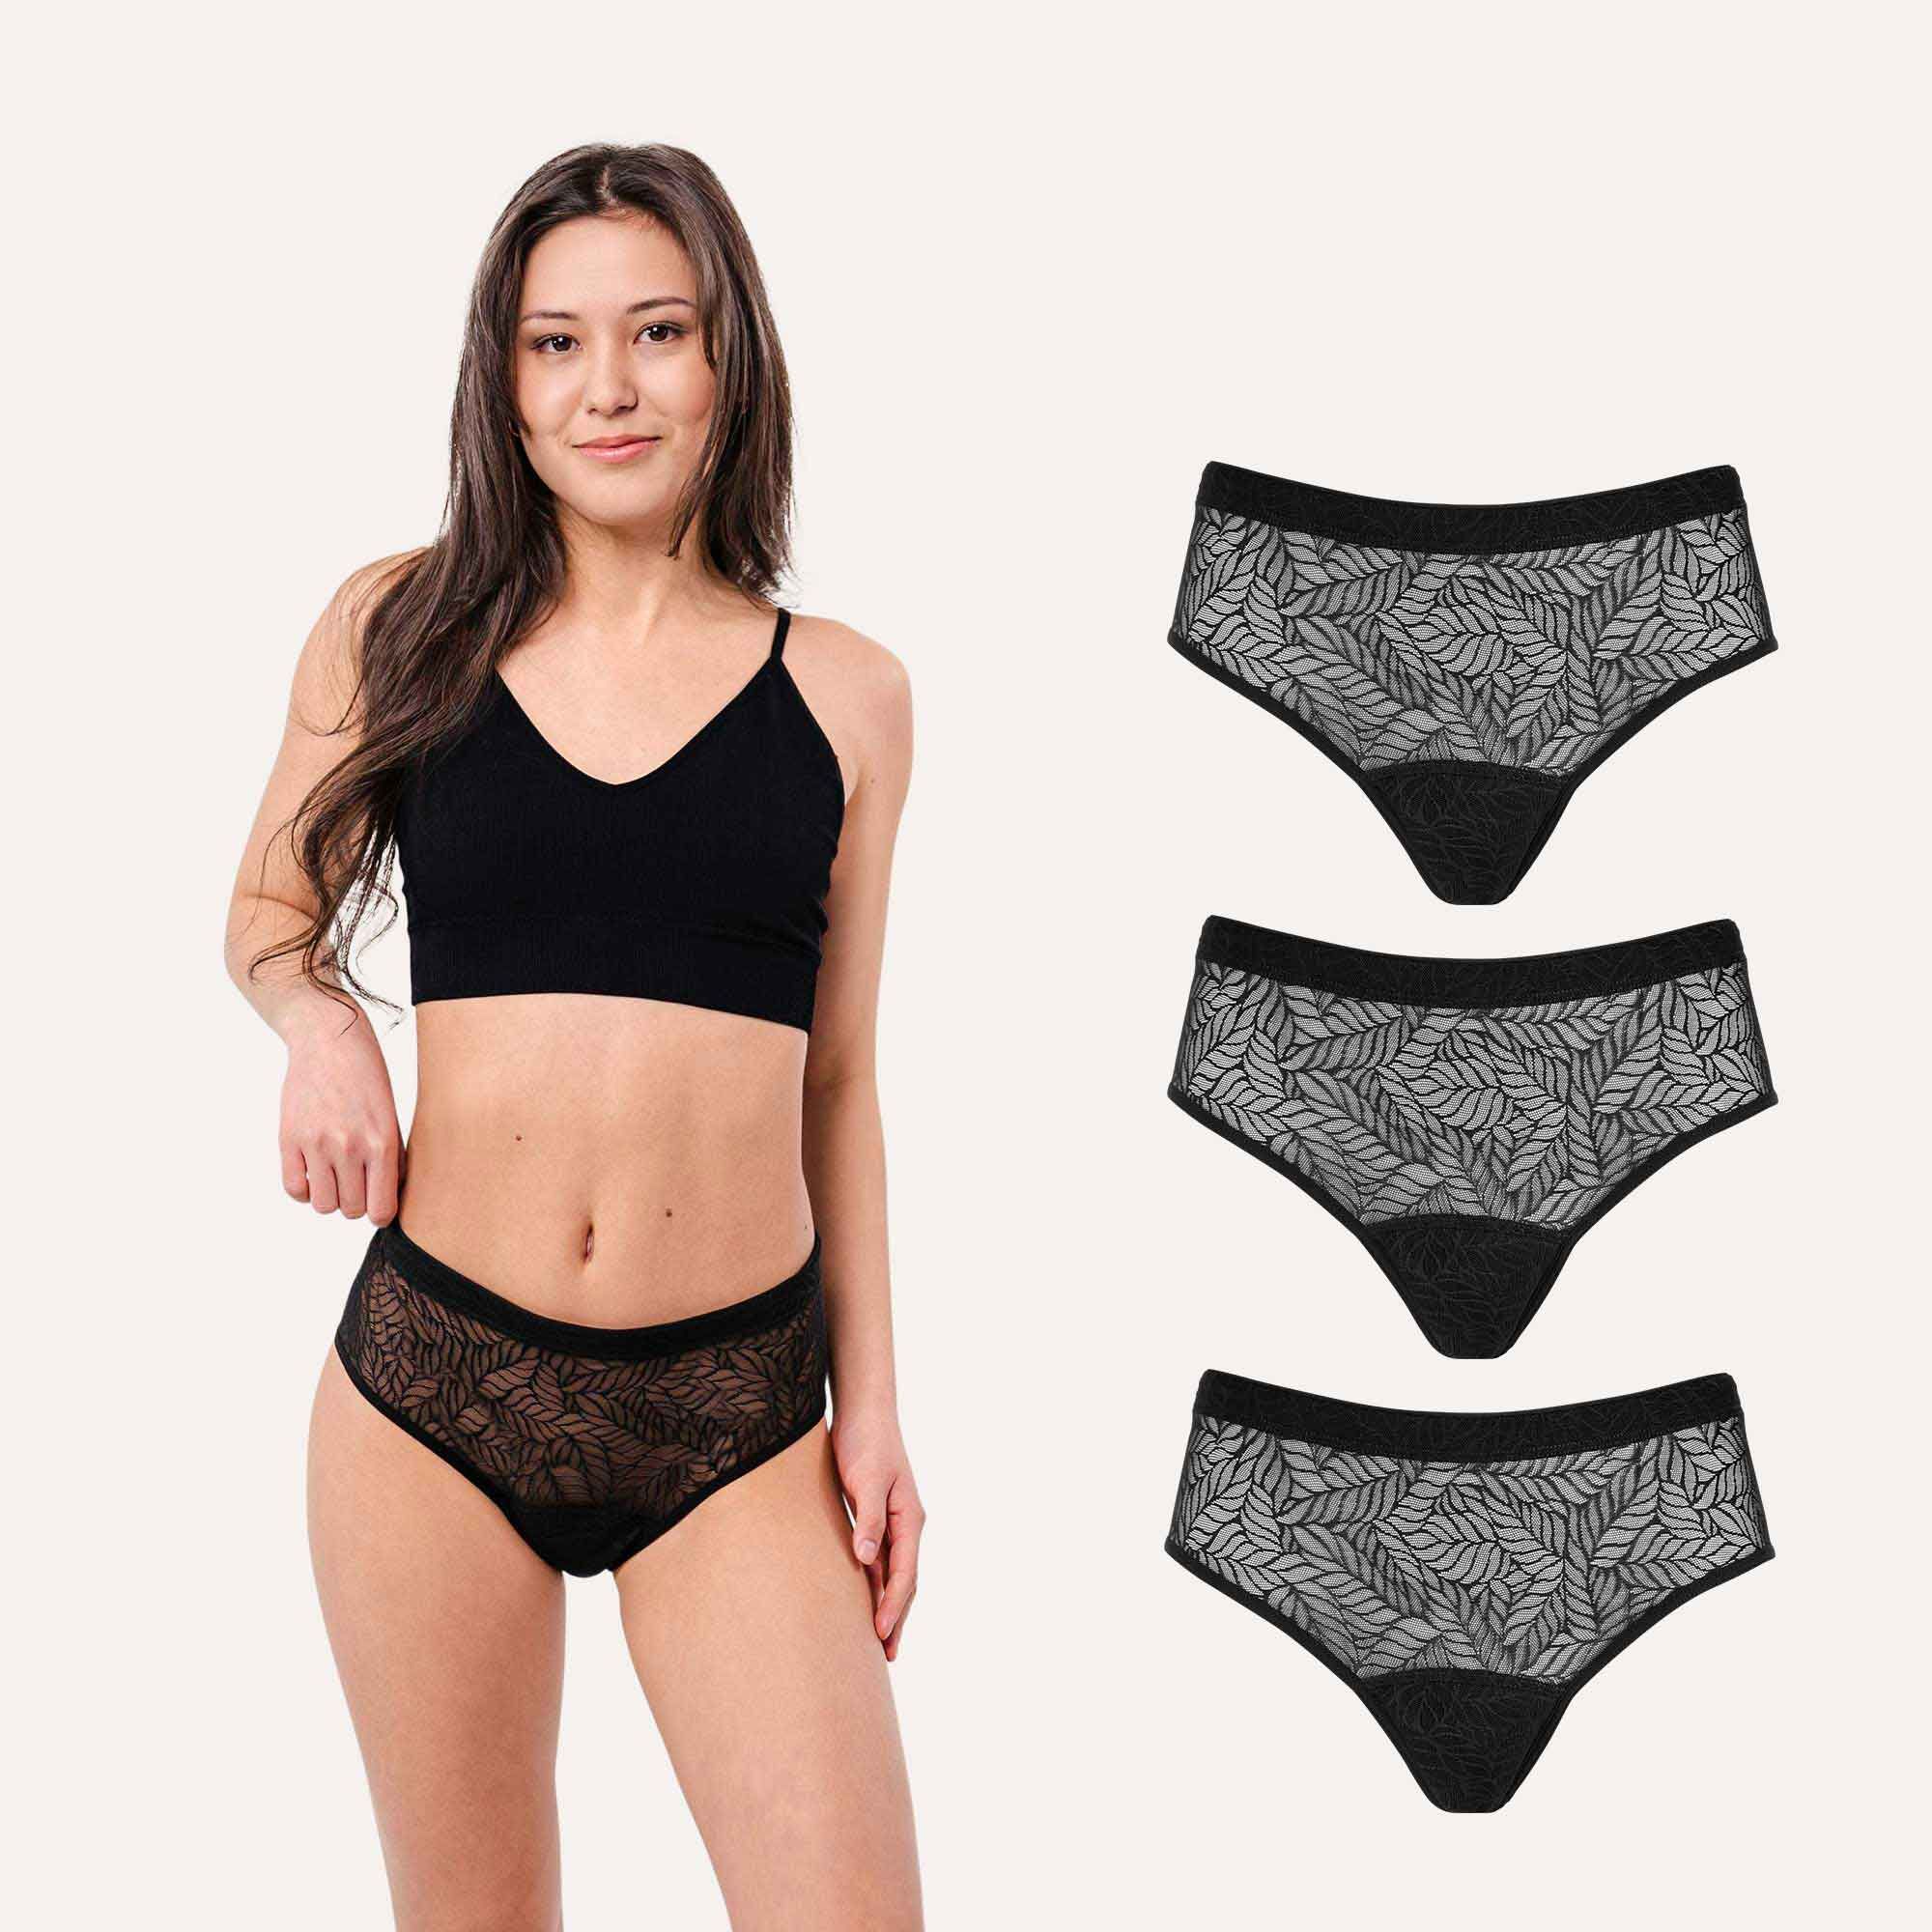 Period Underwear Recycled Lace Leaf Hipster (Multipack of 3)